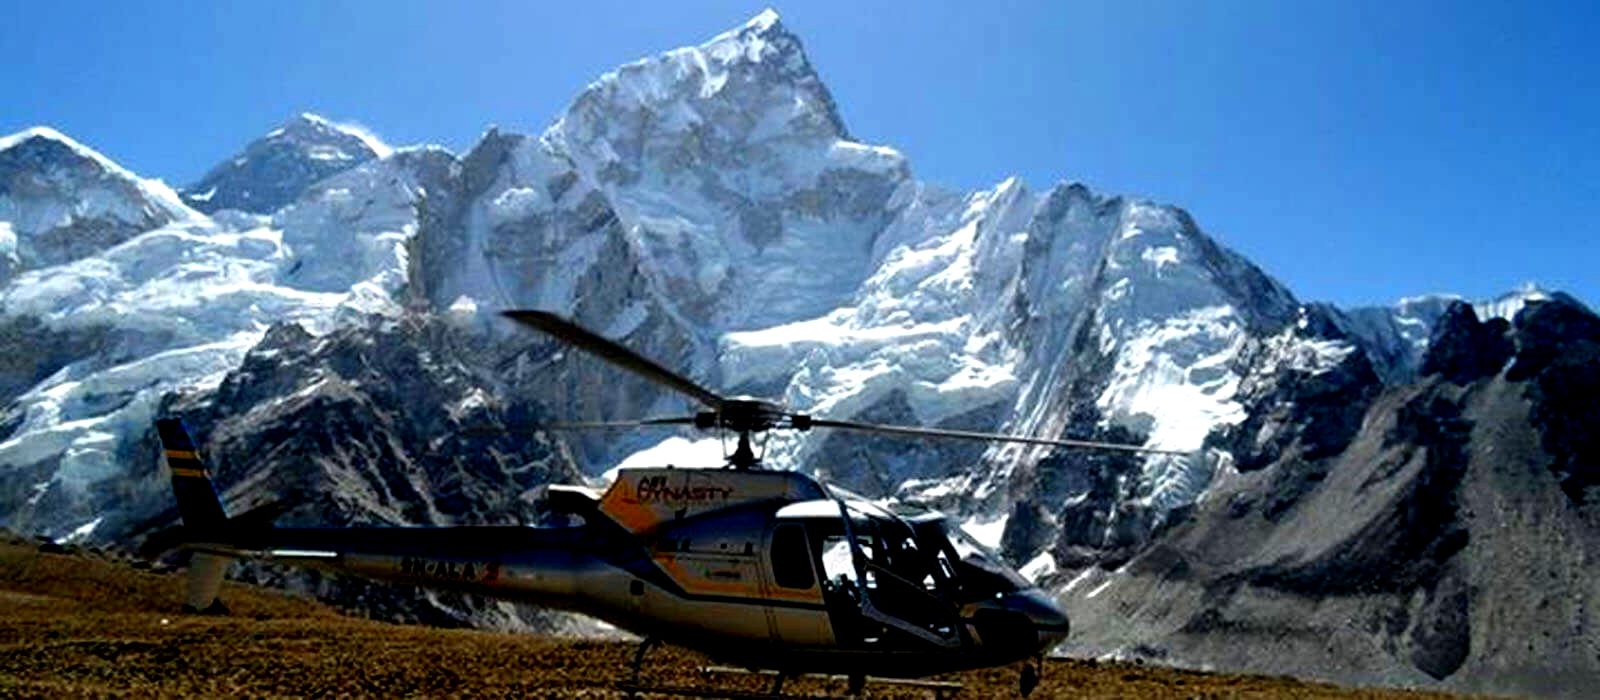 Everest Base Camp Helicopter Tour – 1 day